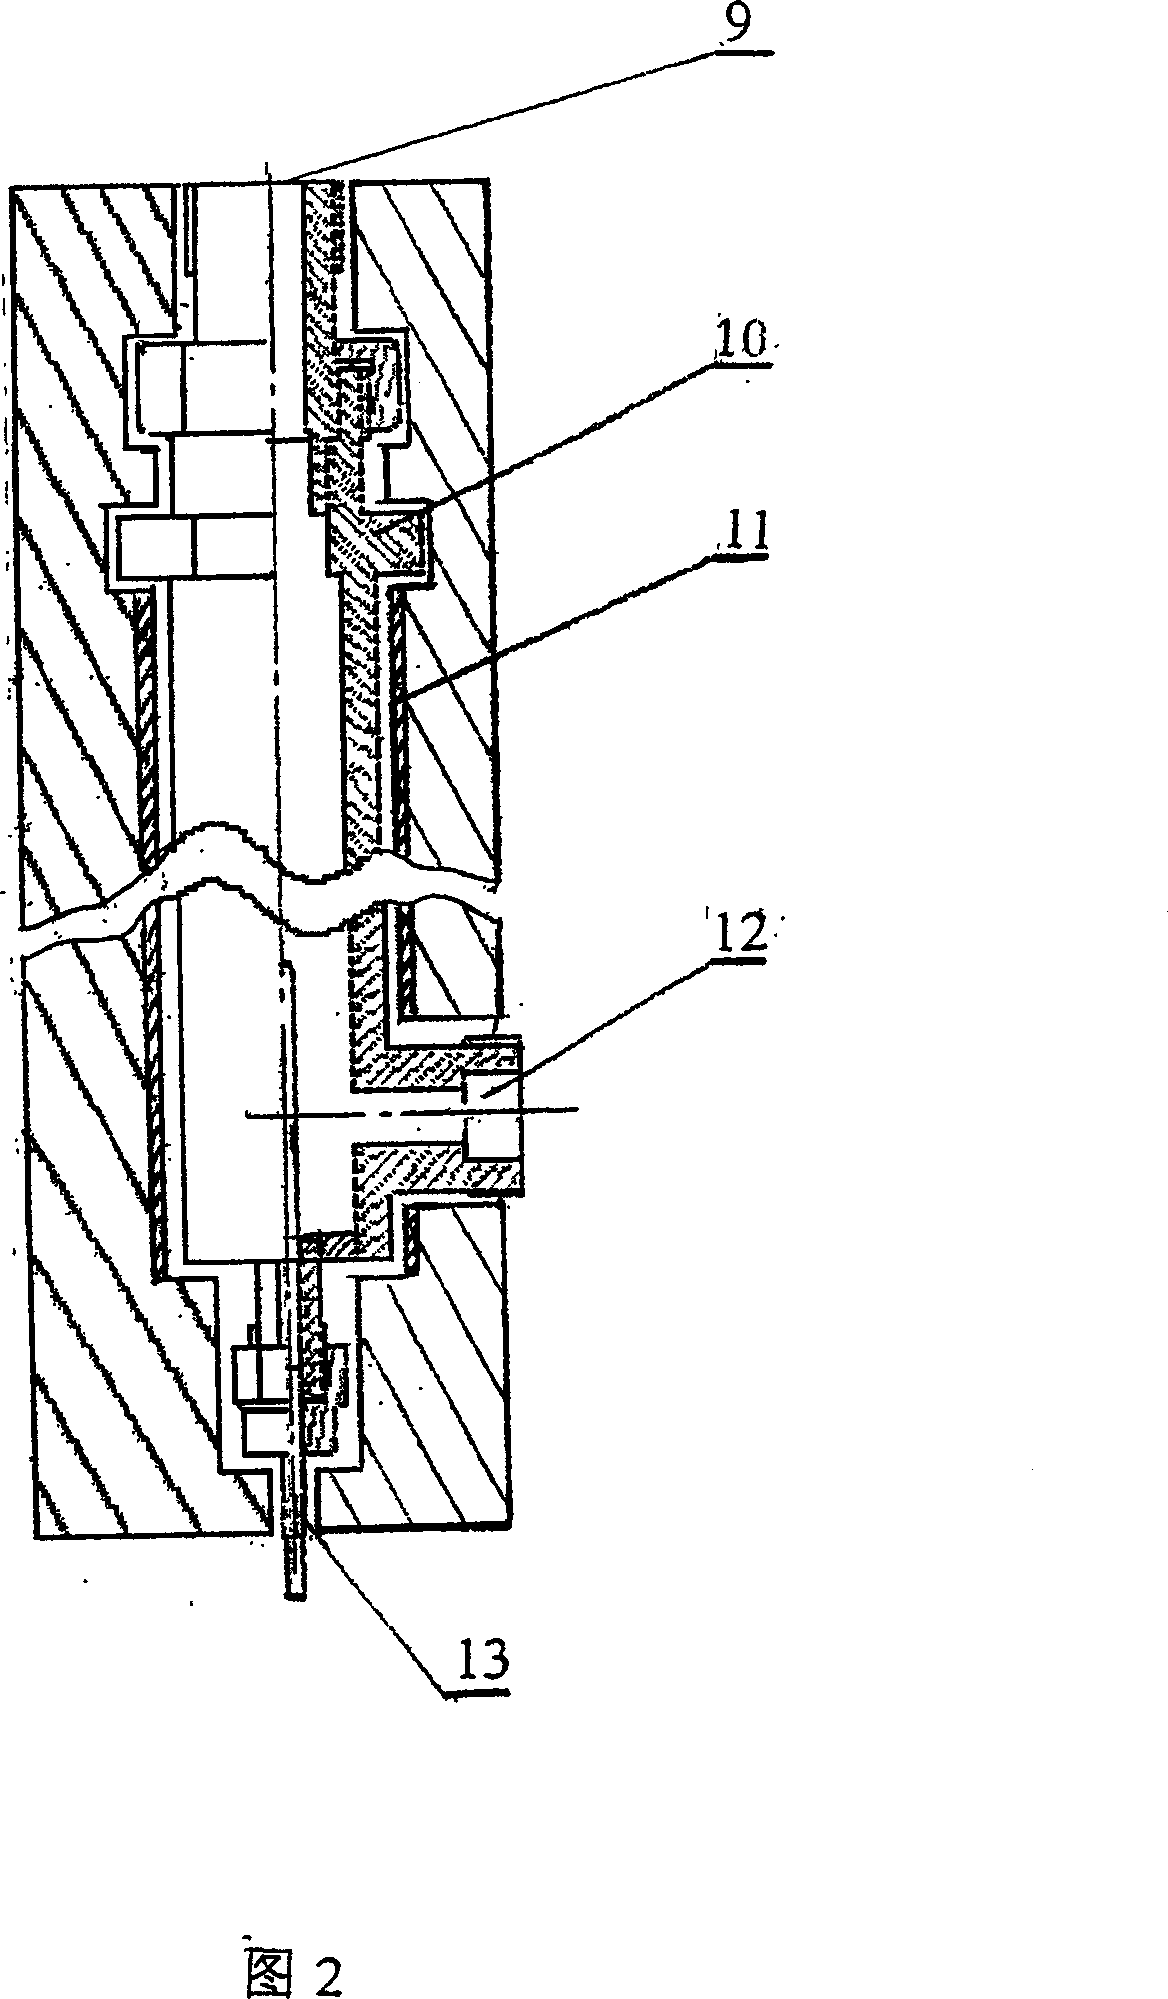 Simulated thermal-insulating reaction experimental method in laboratory